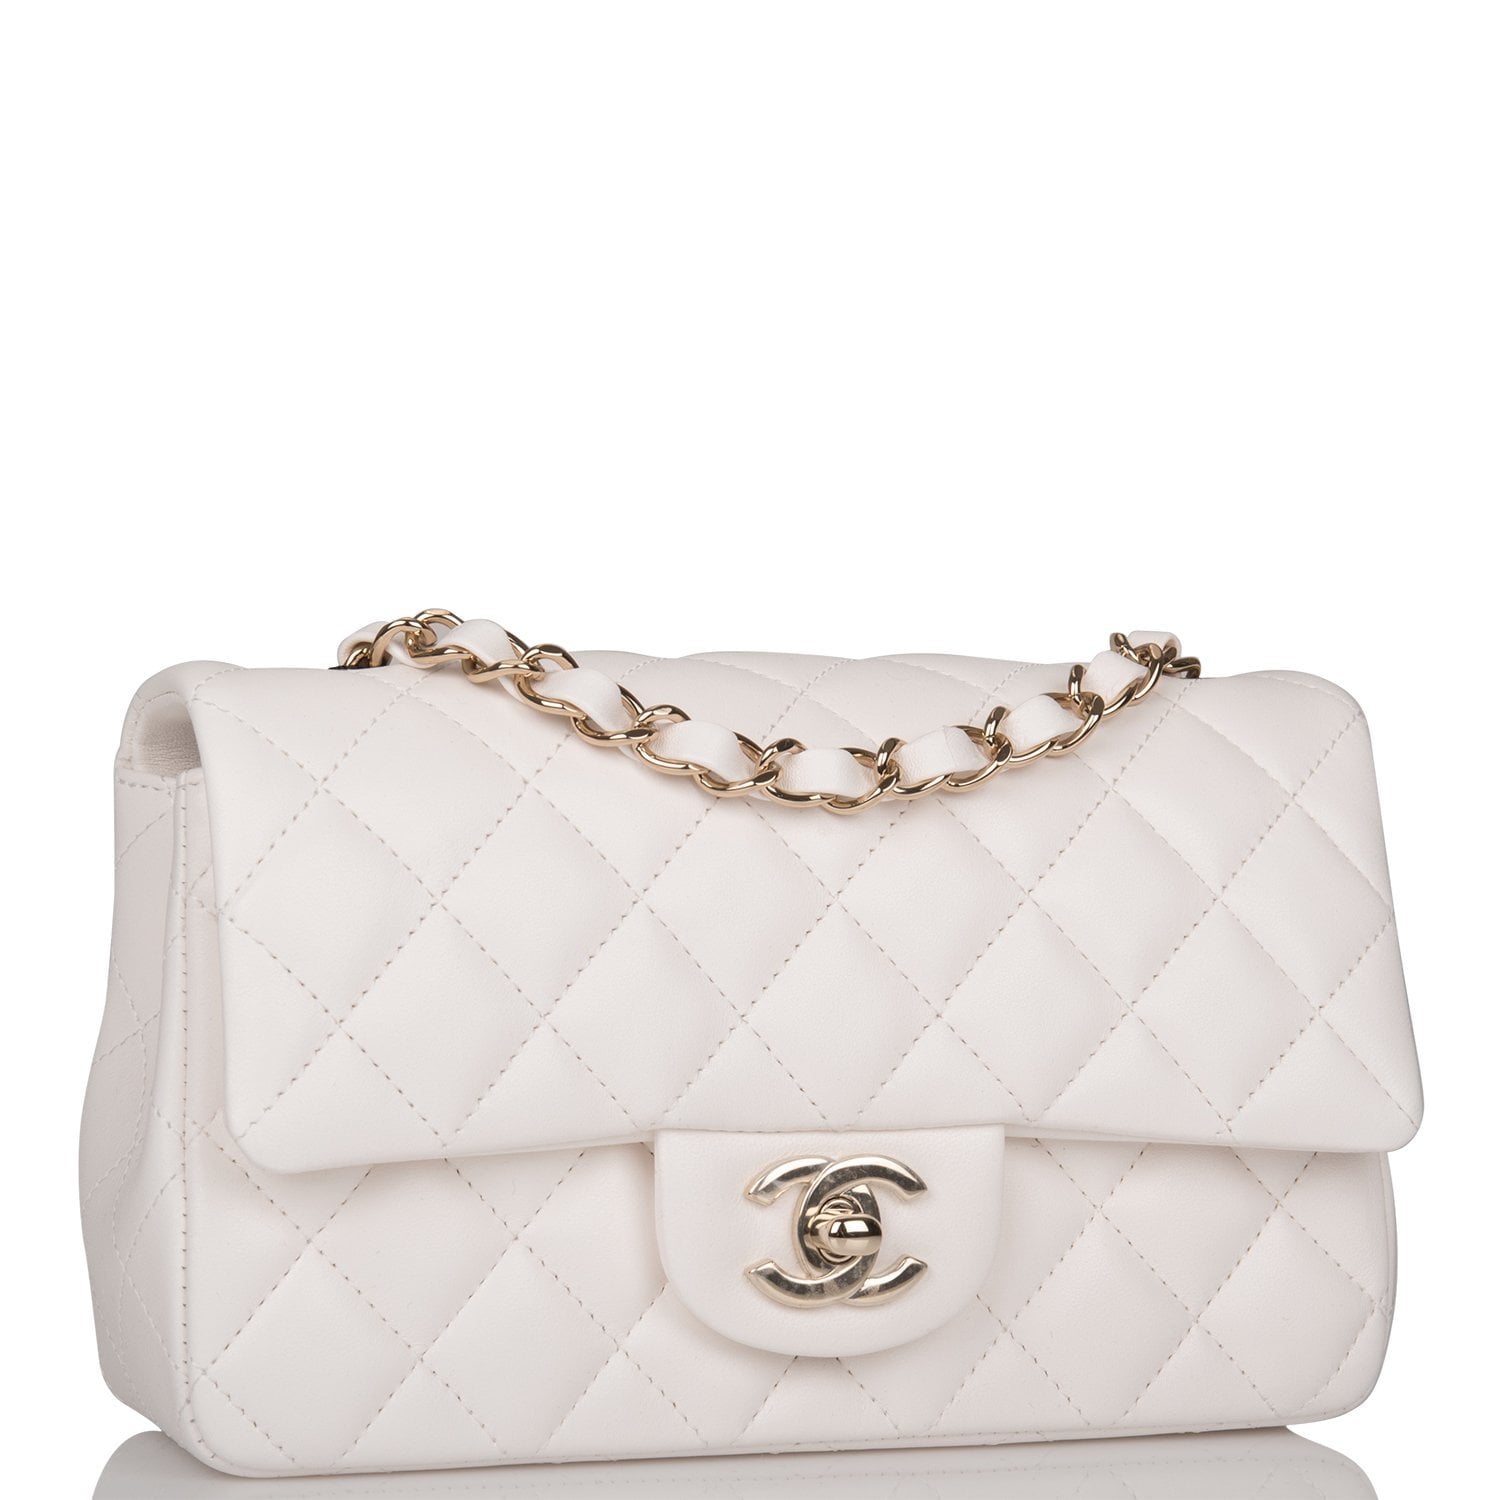 Chanel White Quilted Lambskin Rectangular Mini Classic Flap Bag ...